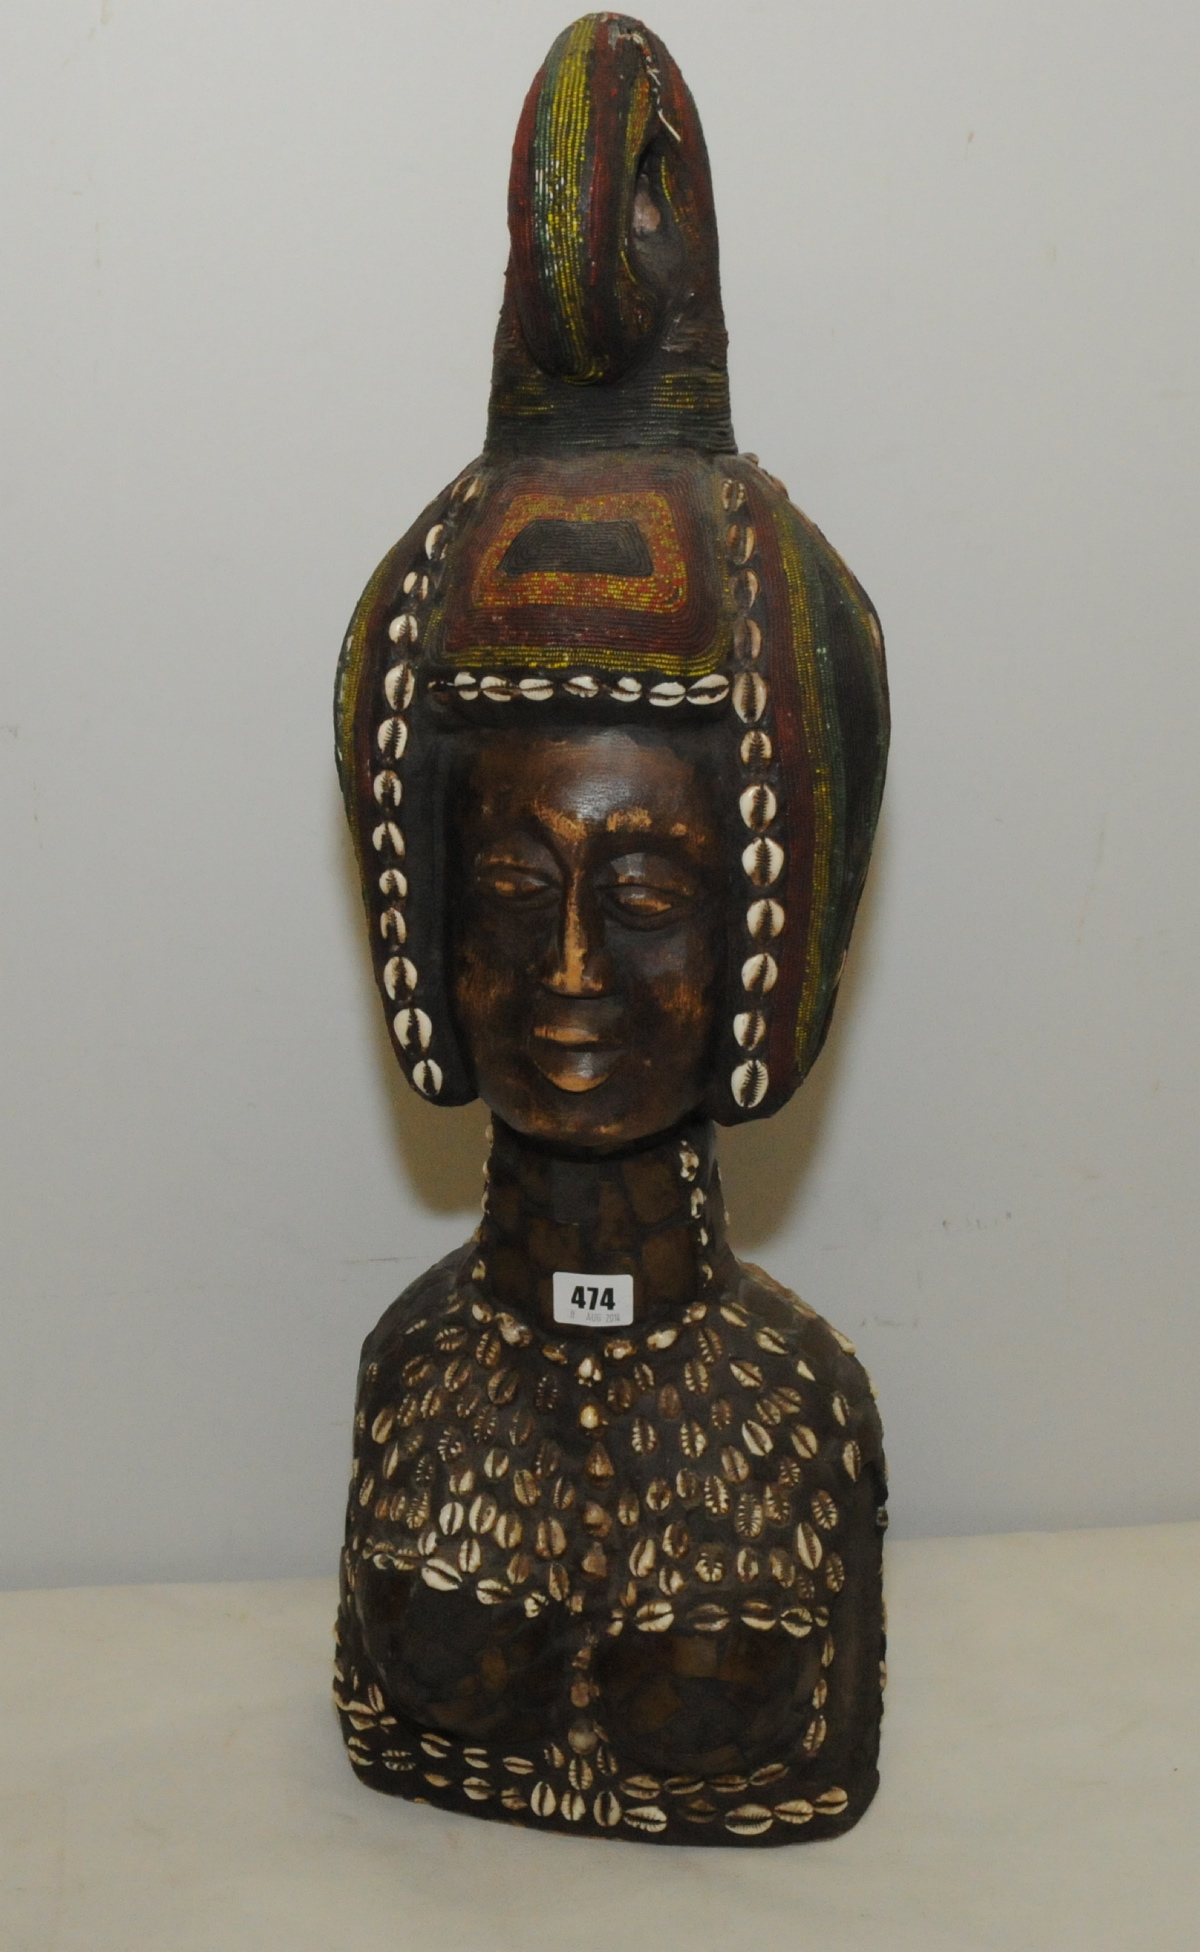 Large African carved bust of a woman wearing a scrolled head dress, profusely decorated with